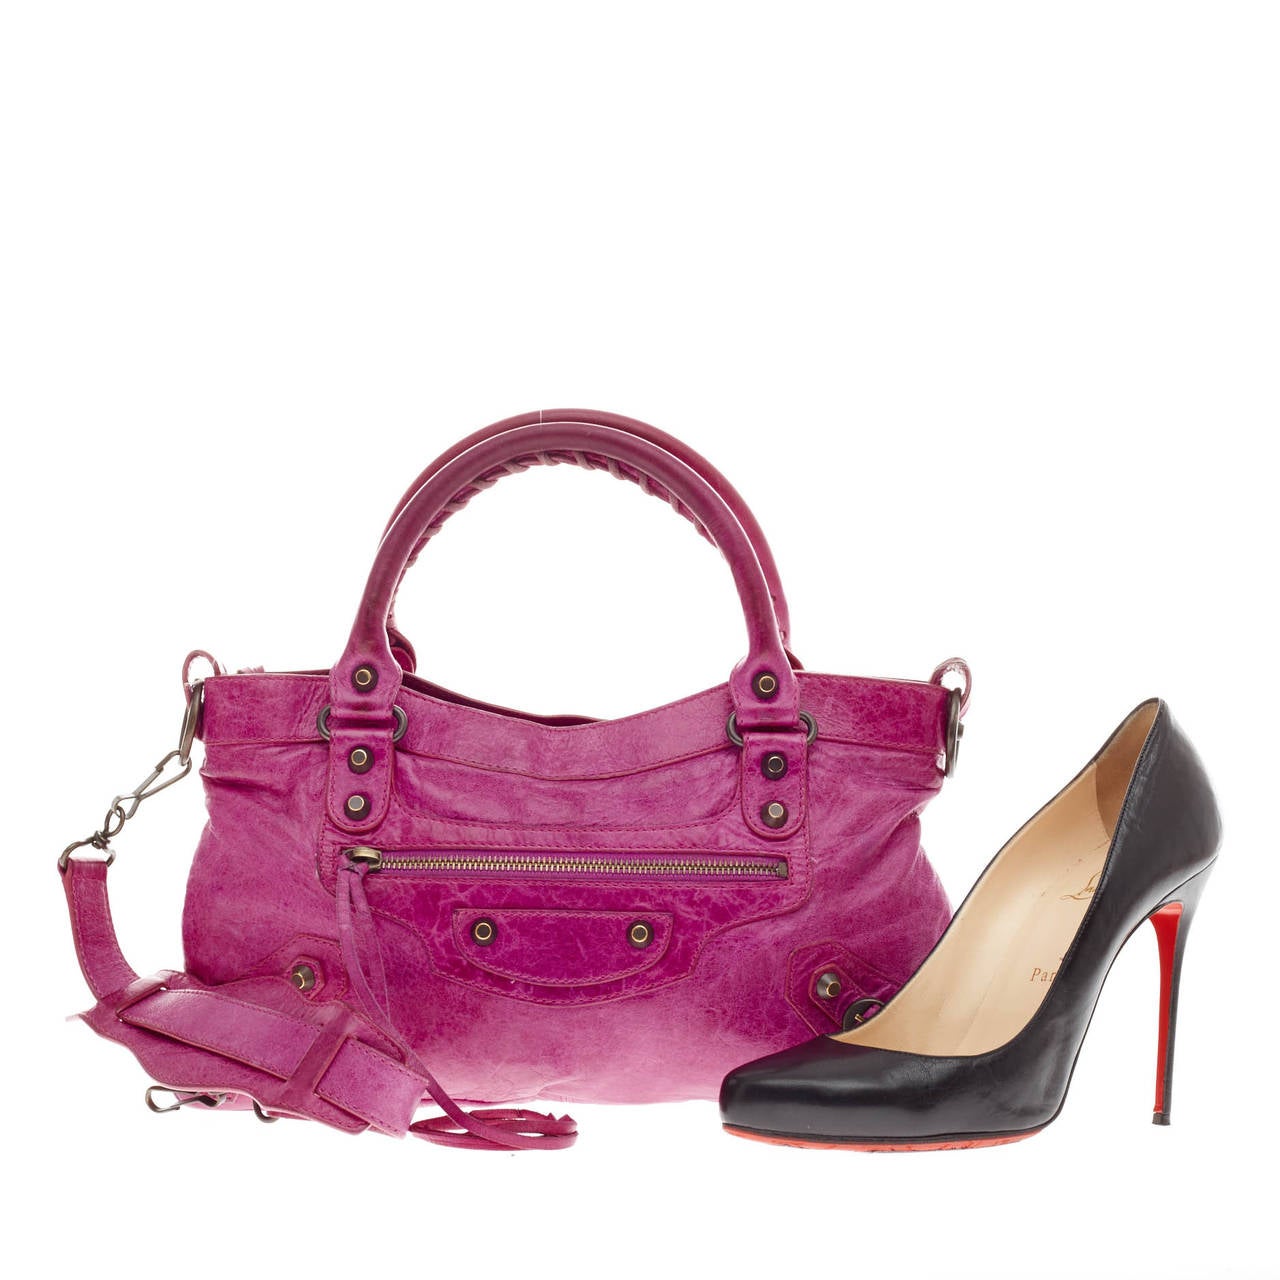 This authentic Balenciaga First Classic Studs in fuchsia purple is the perfect eye-catching accessory for spring. Constructed in soft, distressed leather, this easy-to-carry, everyday bag features Balenciaga's classic brass studs, whip stitched top